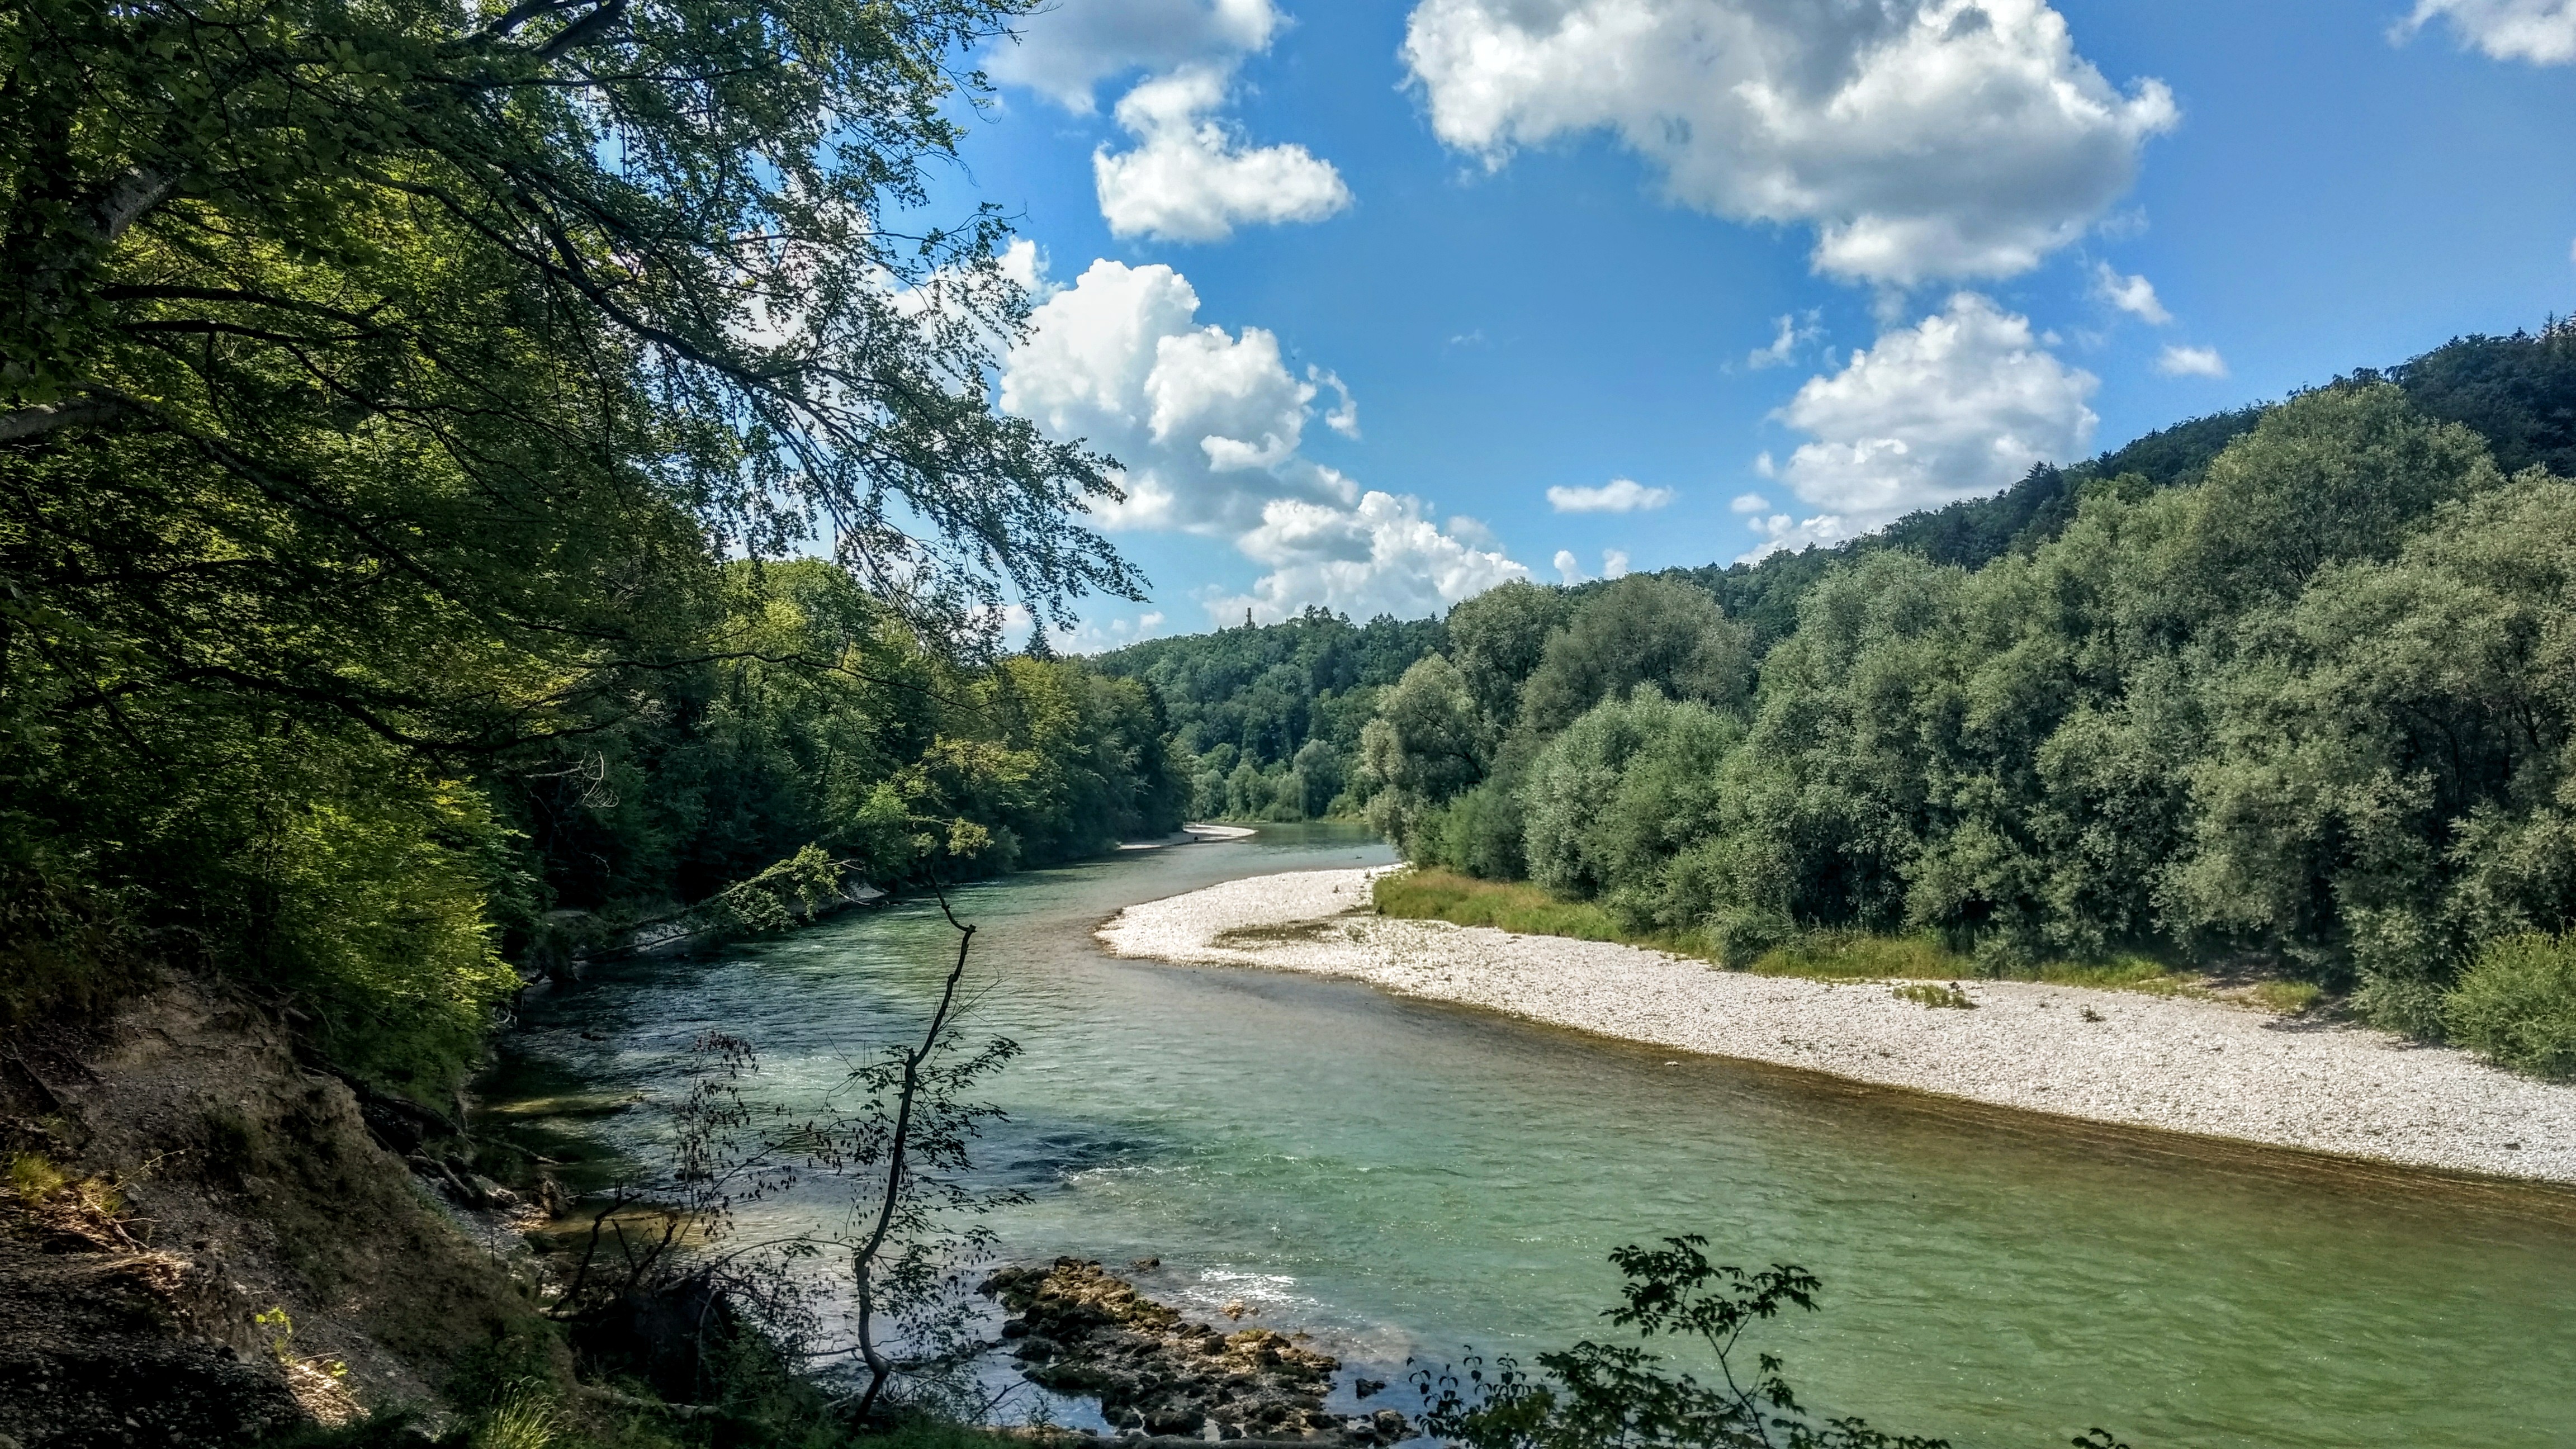 Isar river inviting us for a swim